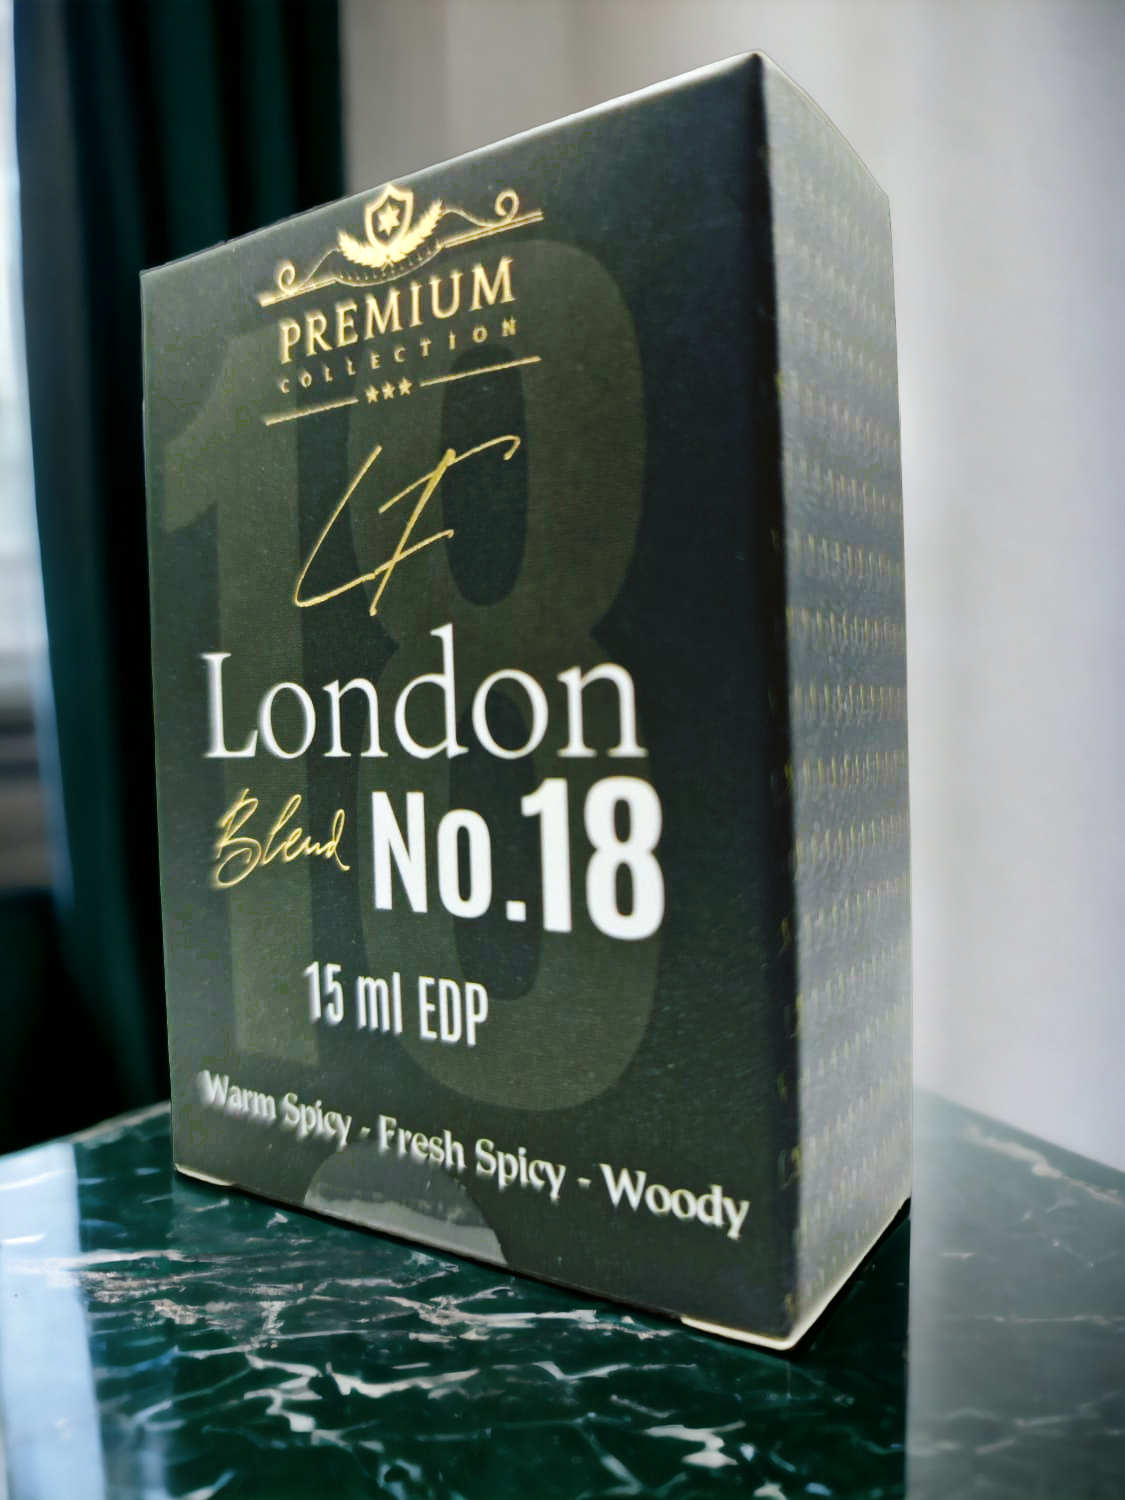 Blend No.18 London by Livfragrance® Signature Collection